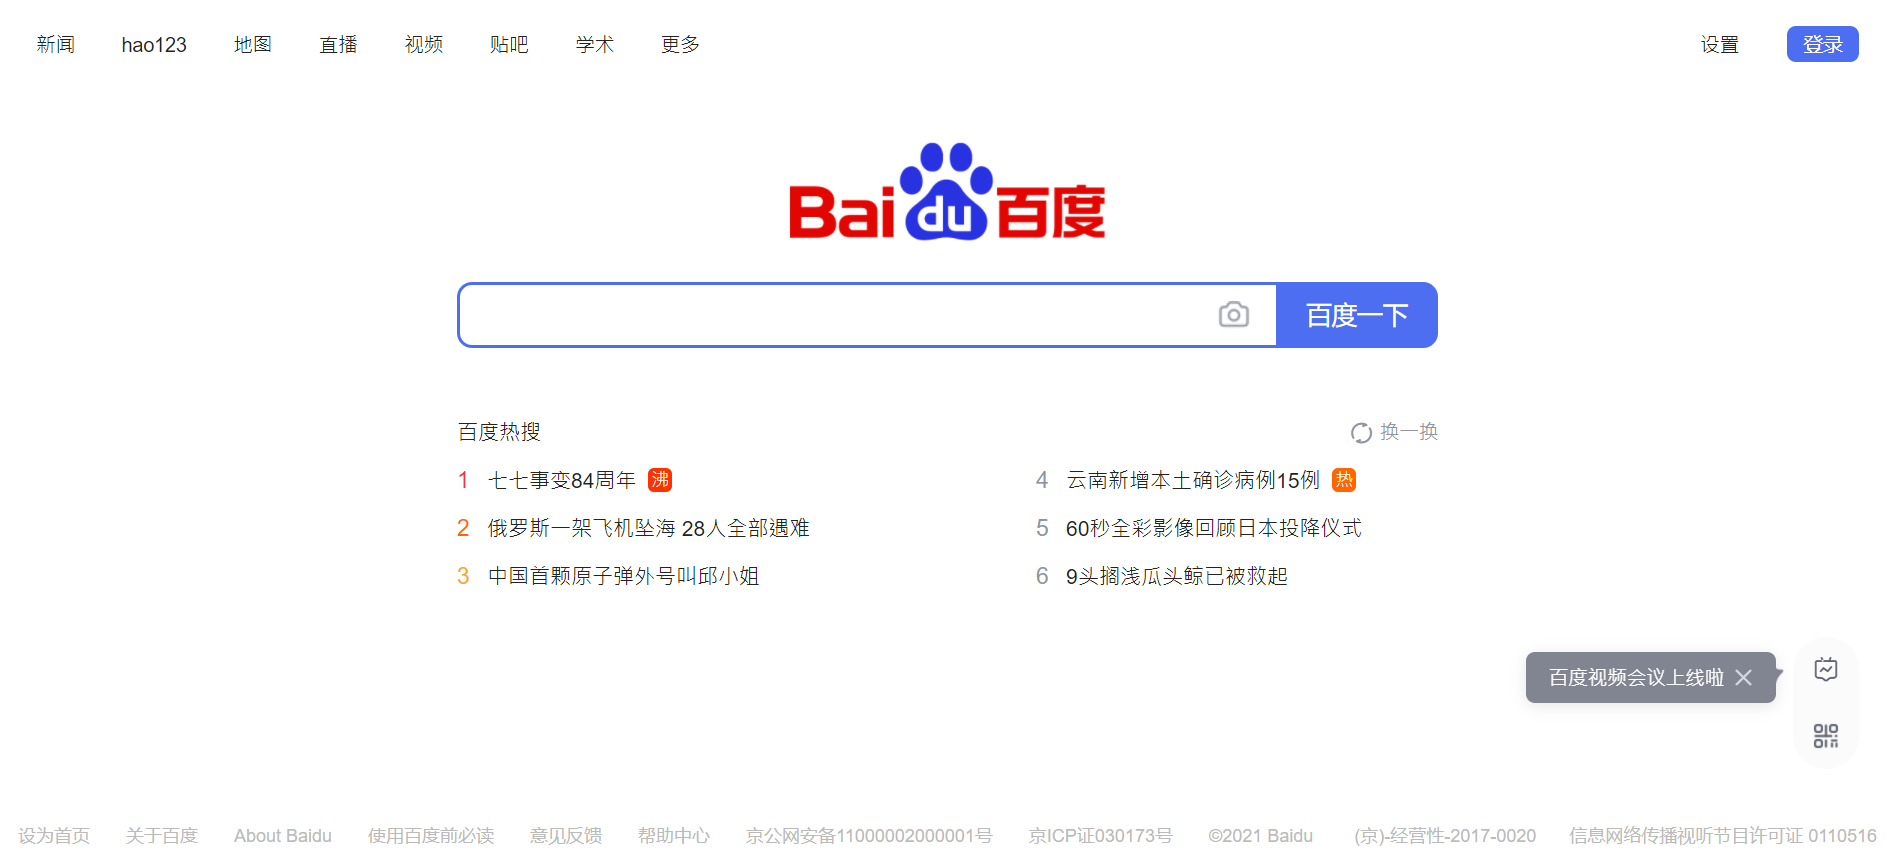 Screen capture of Chinese search engine Baidu's website homepage